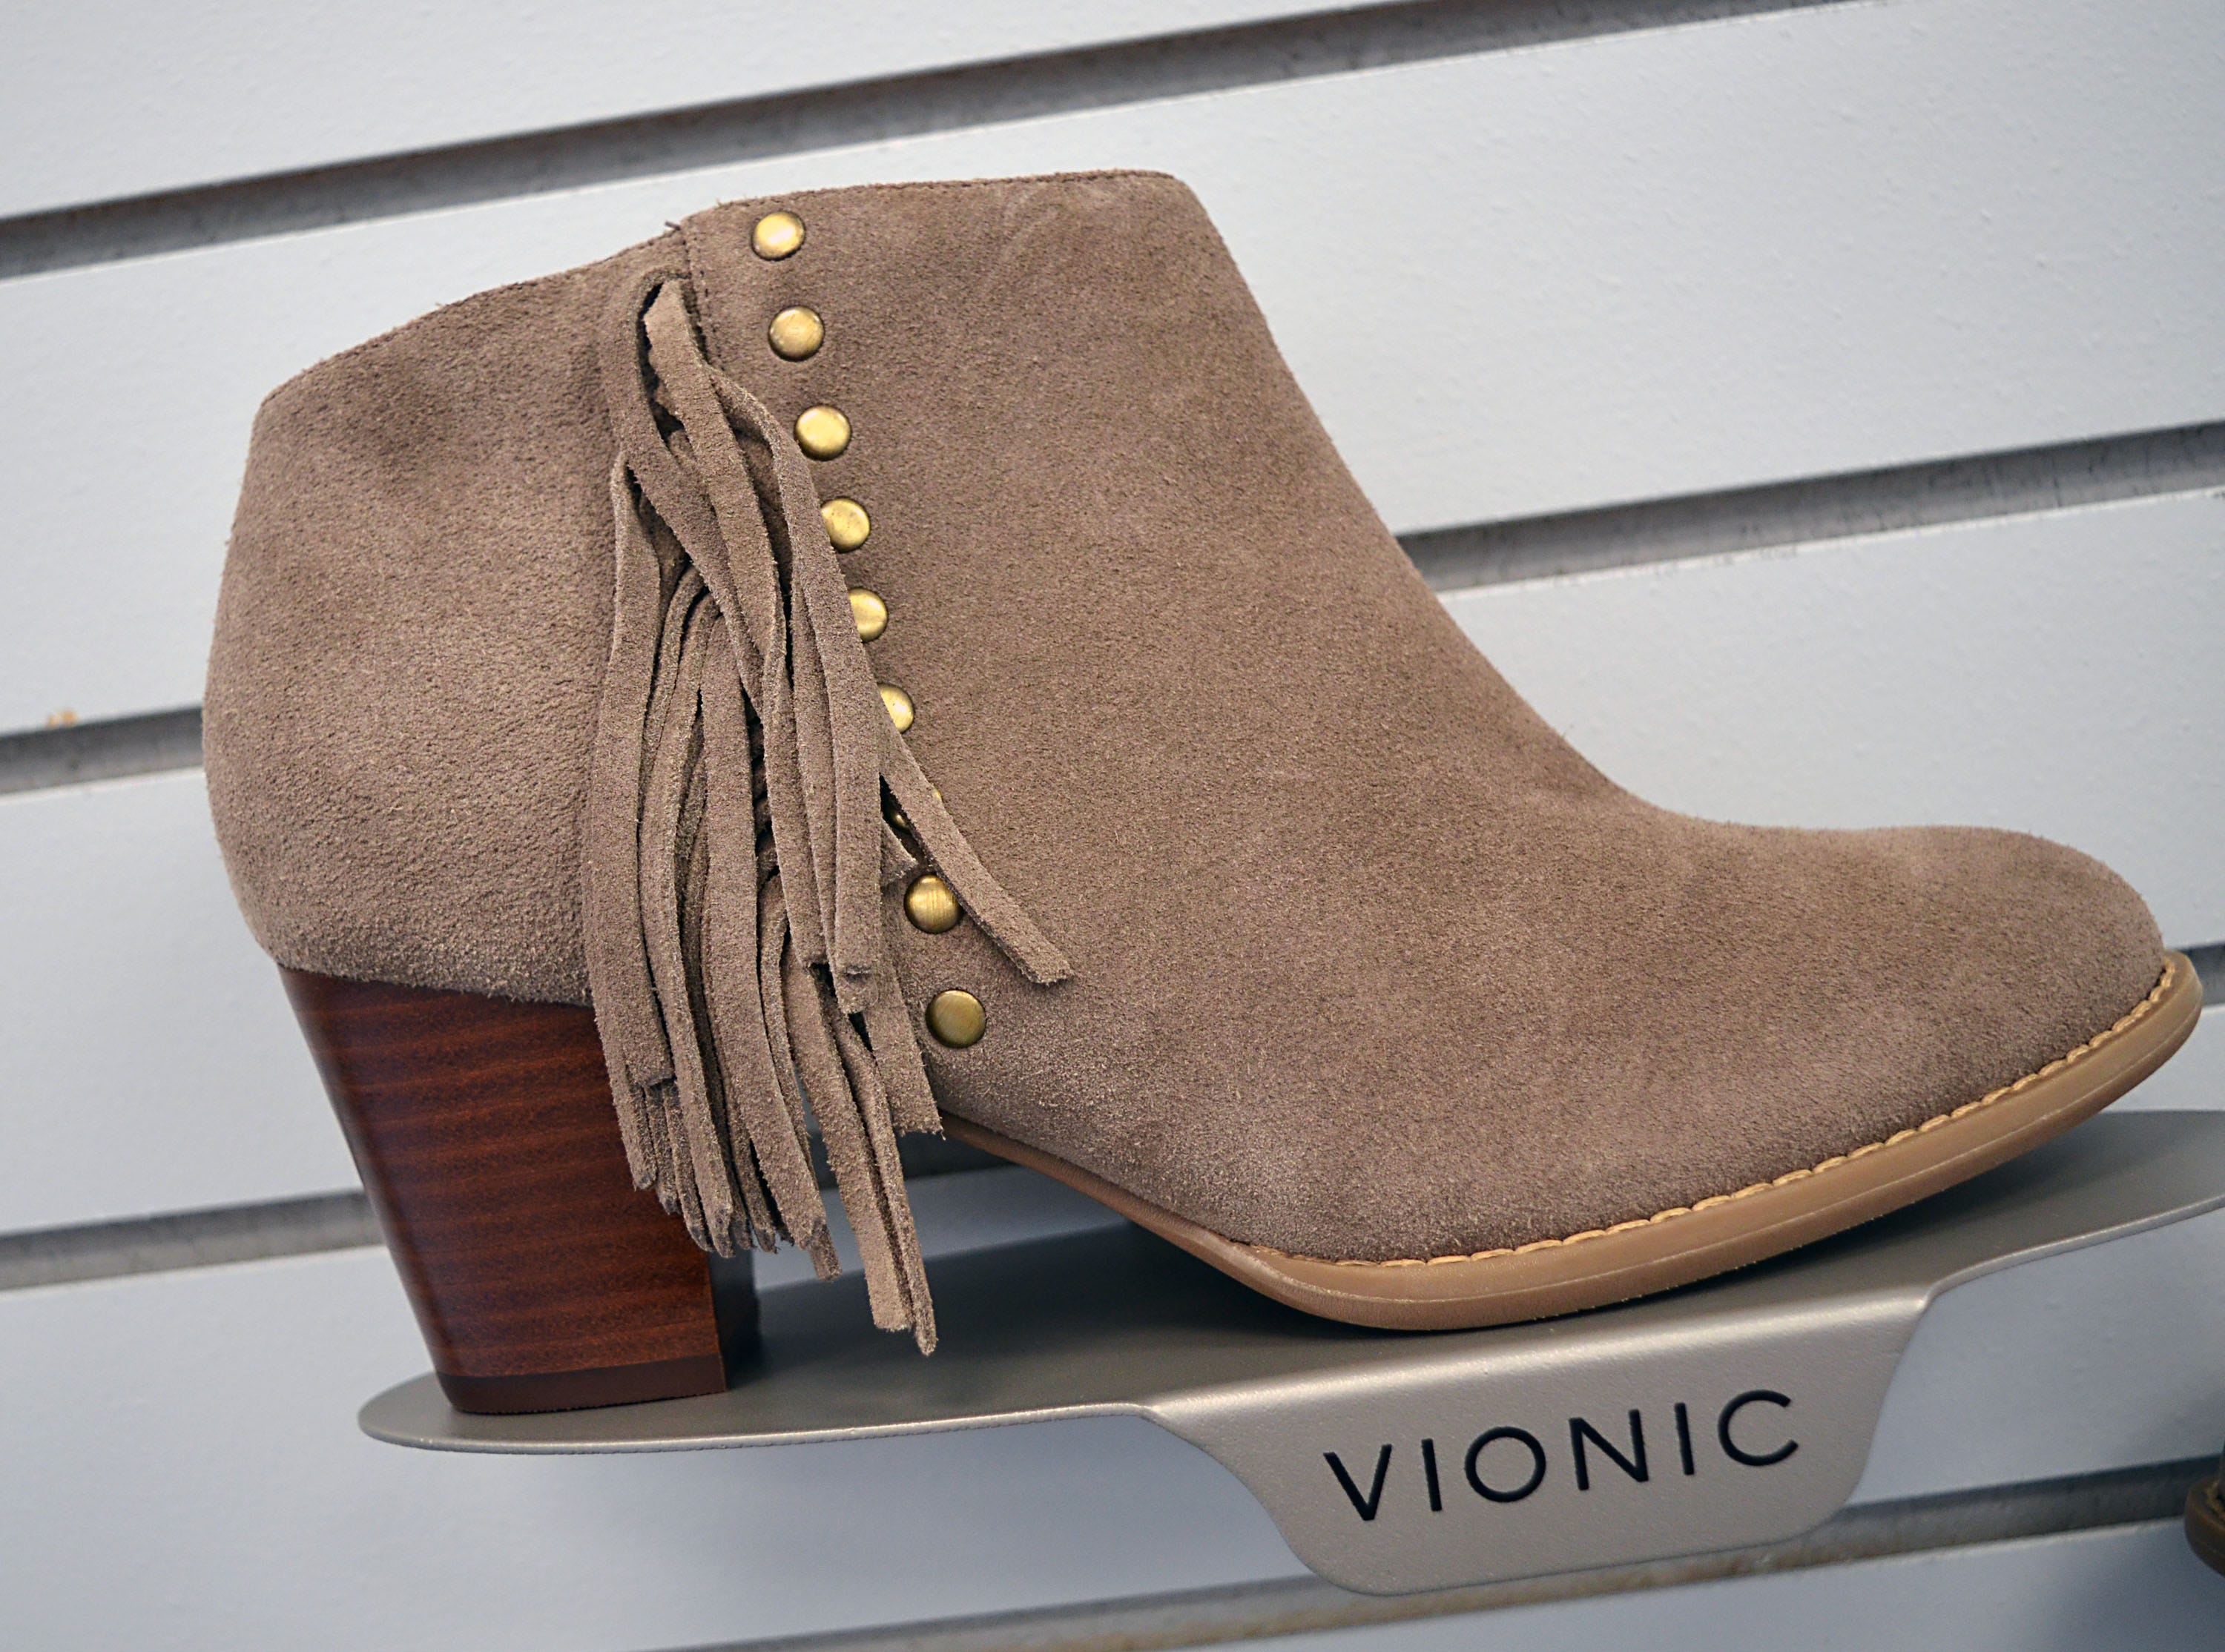 stores near me that sell vionic shoes